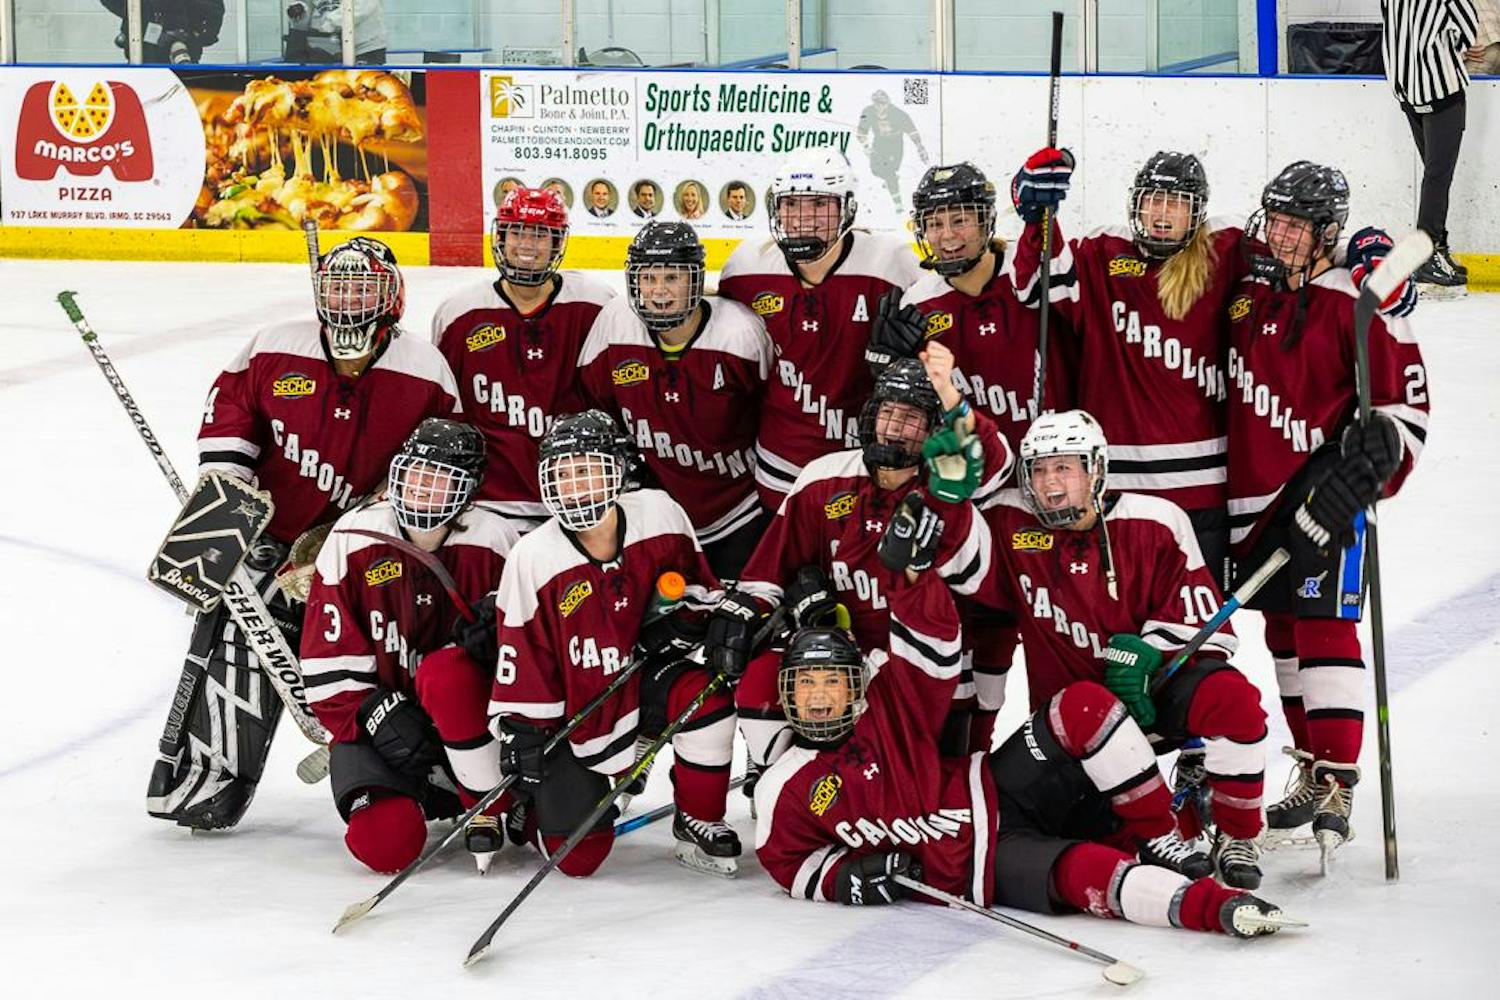 The Carolina women's club hockey team celebrates after its 2-1 victory against the South Carolina Lady Warriors on Oct. 1, 2023 in Irmo, S.C. This matchup marks the first recorded female hockey game in the 222-year history of ɫɫƵ.